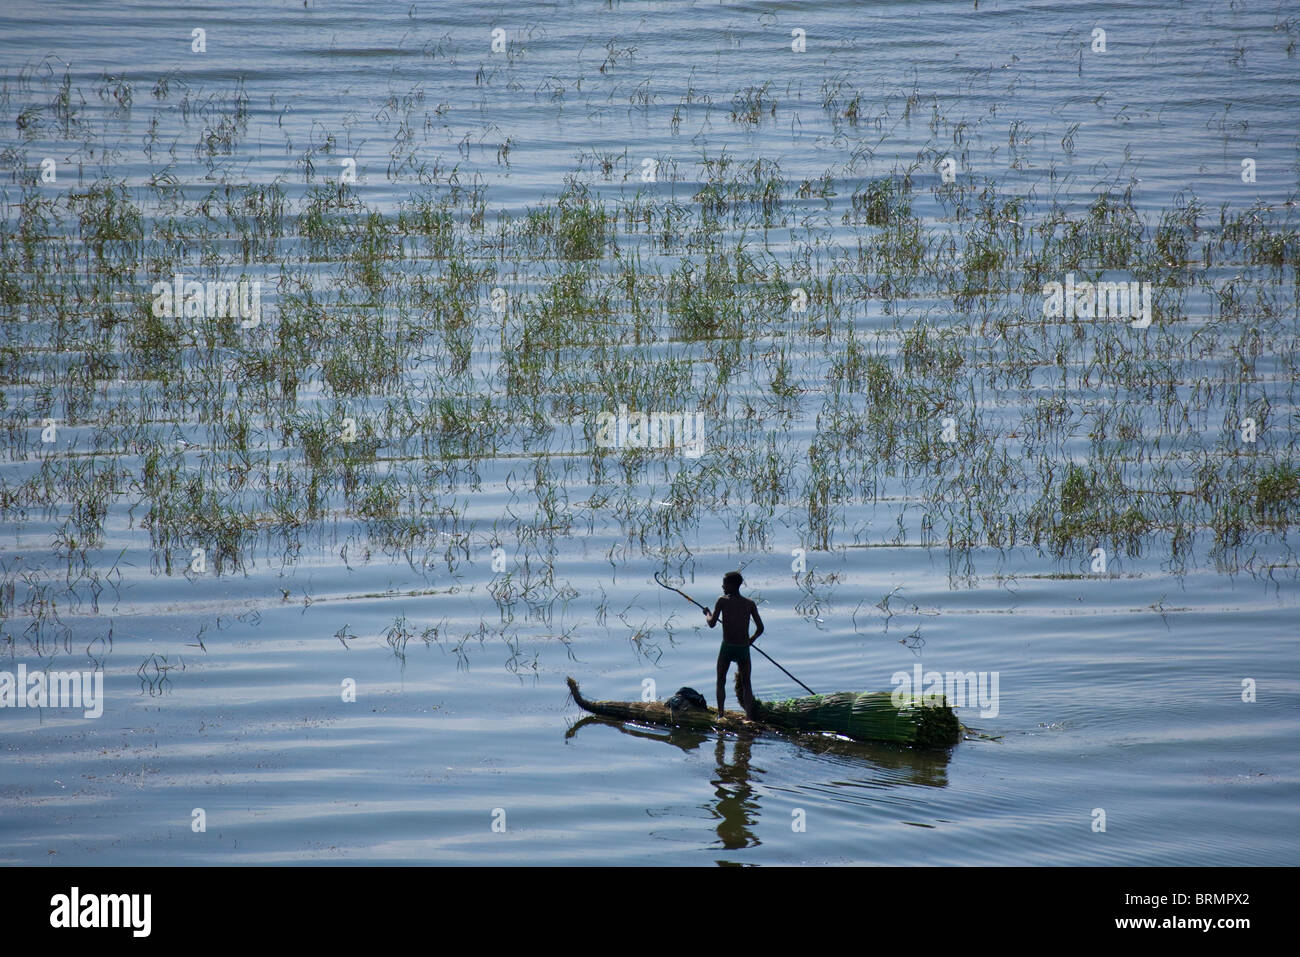 Fisherman poling along on a traditional papyrus raft Stock Photo